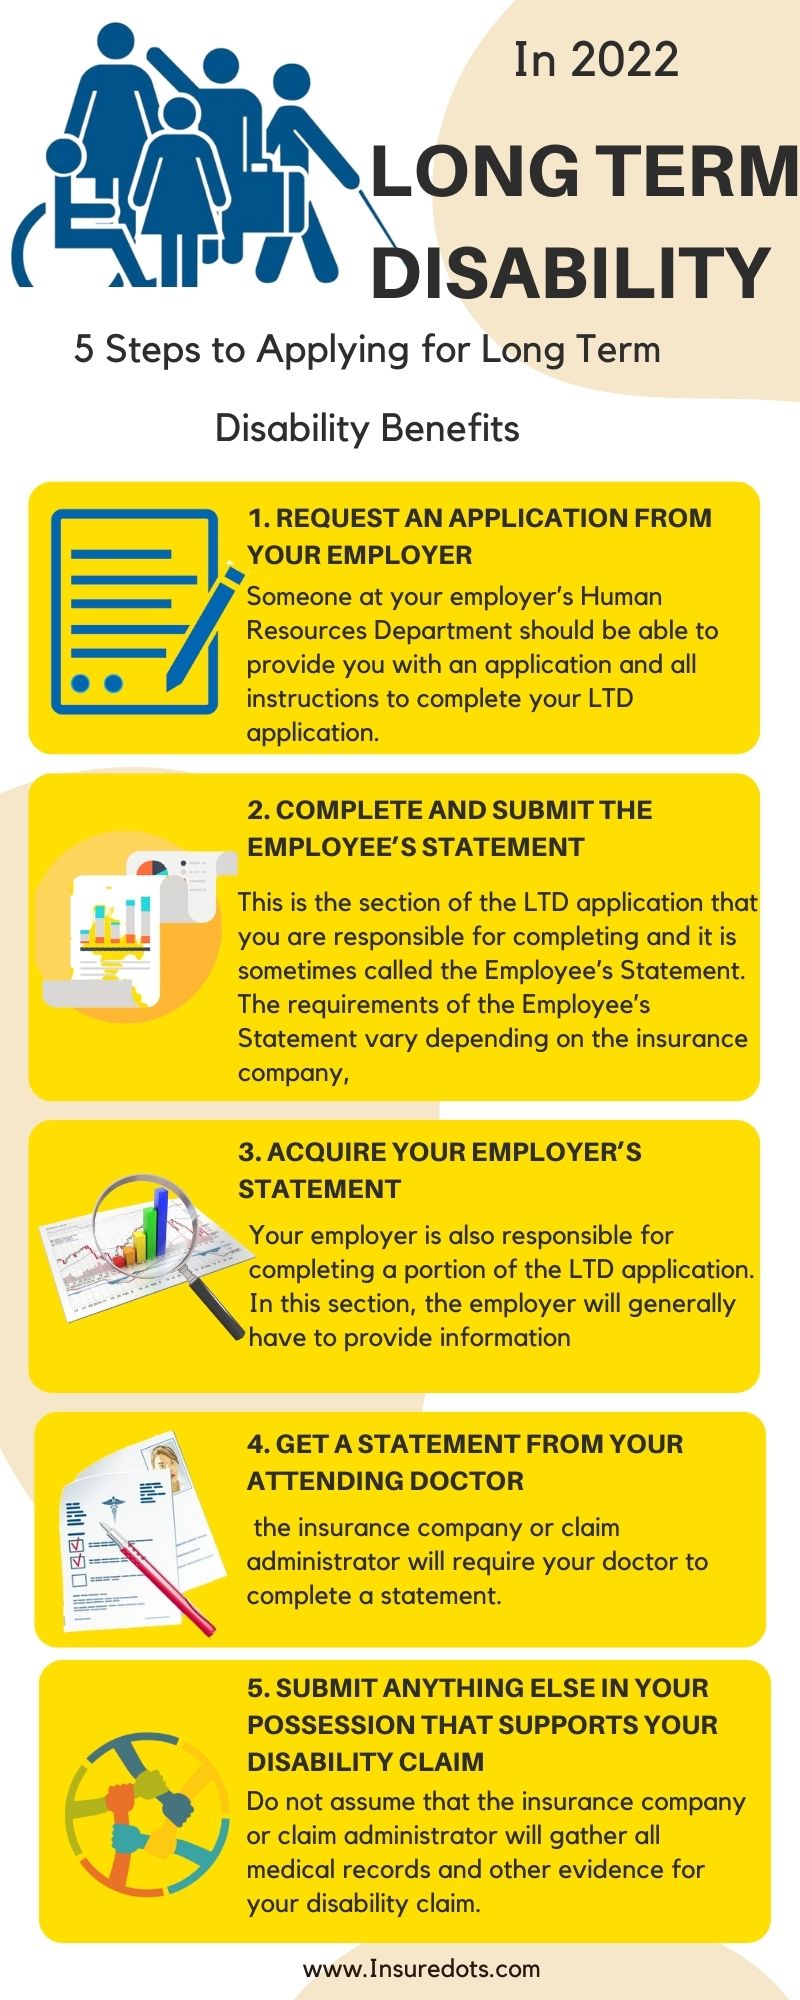 5 Steps to Apply for LTD Benefits Infographic Long Term Disability